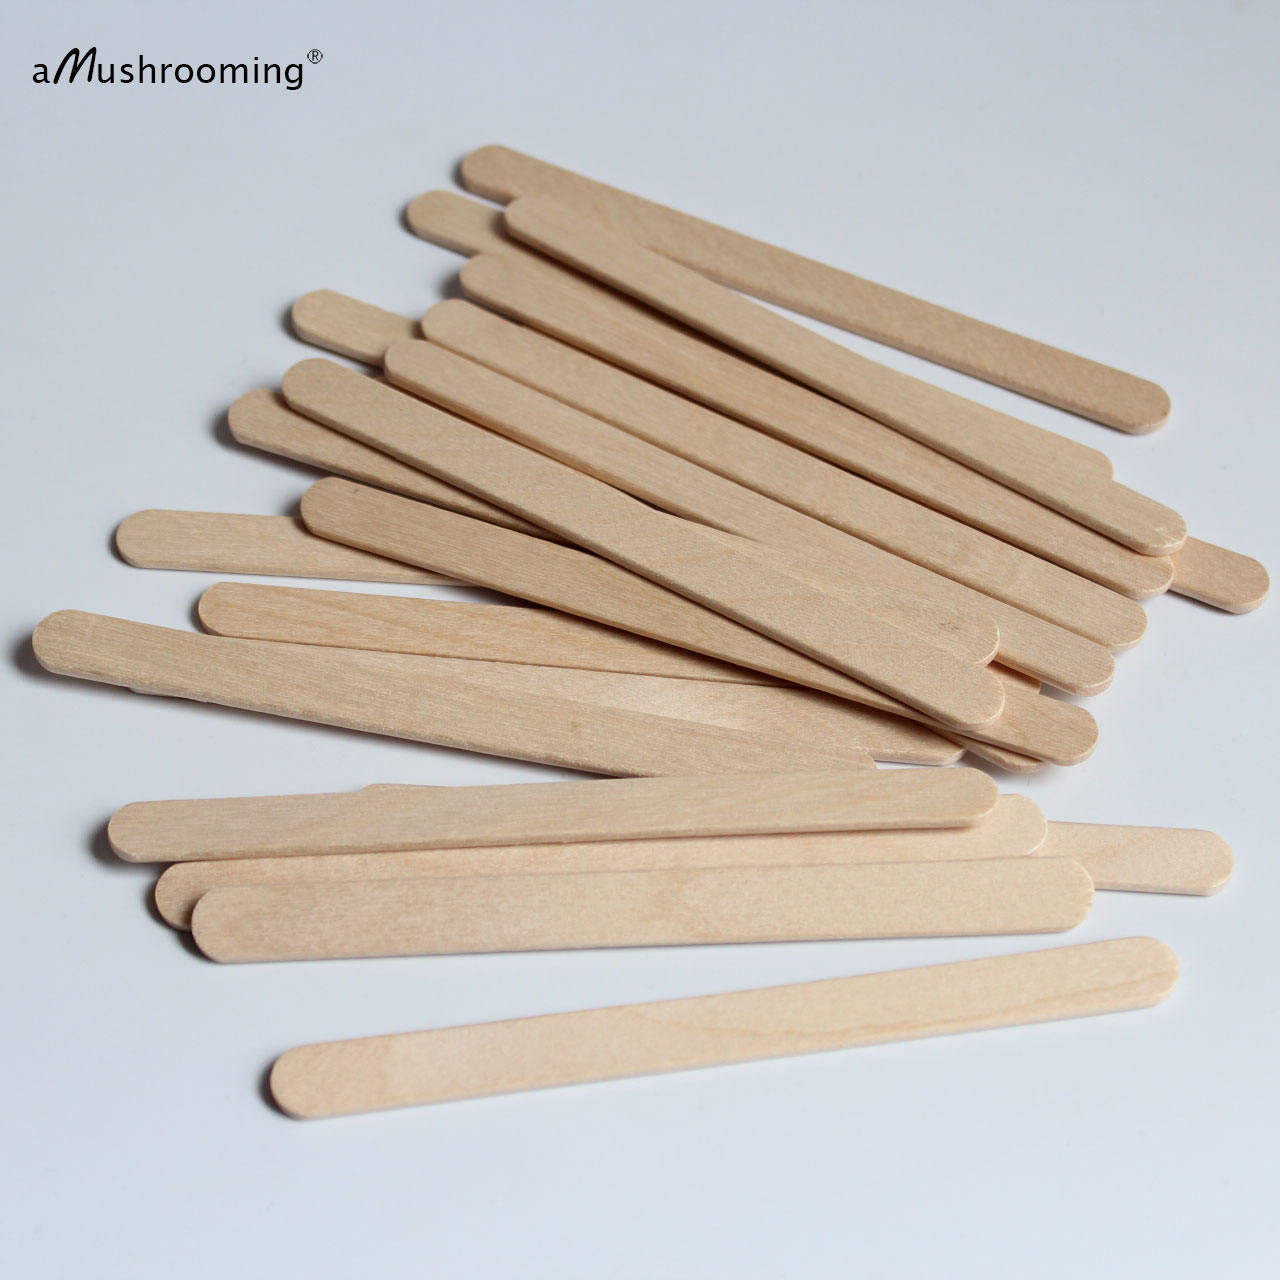 Wholesale fancy popsicle sticks to Make Delicious Ice Cream